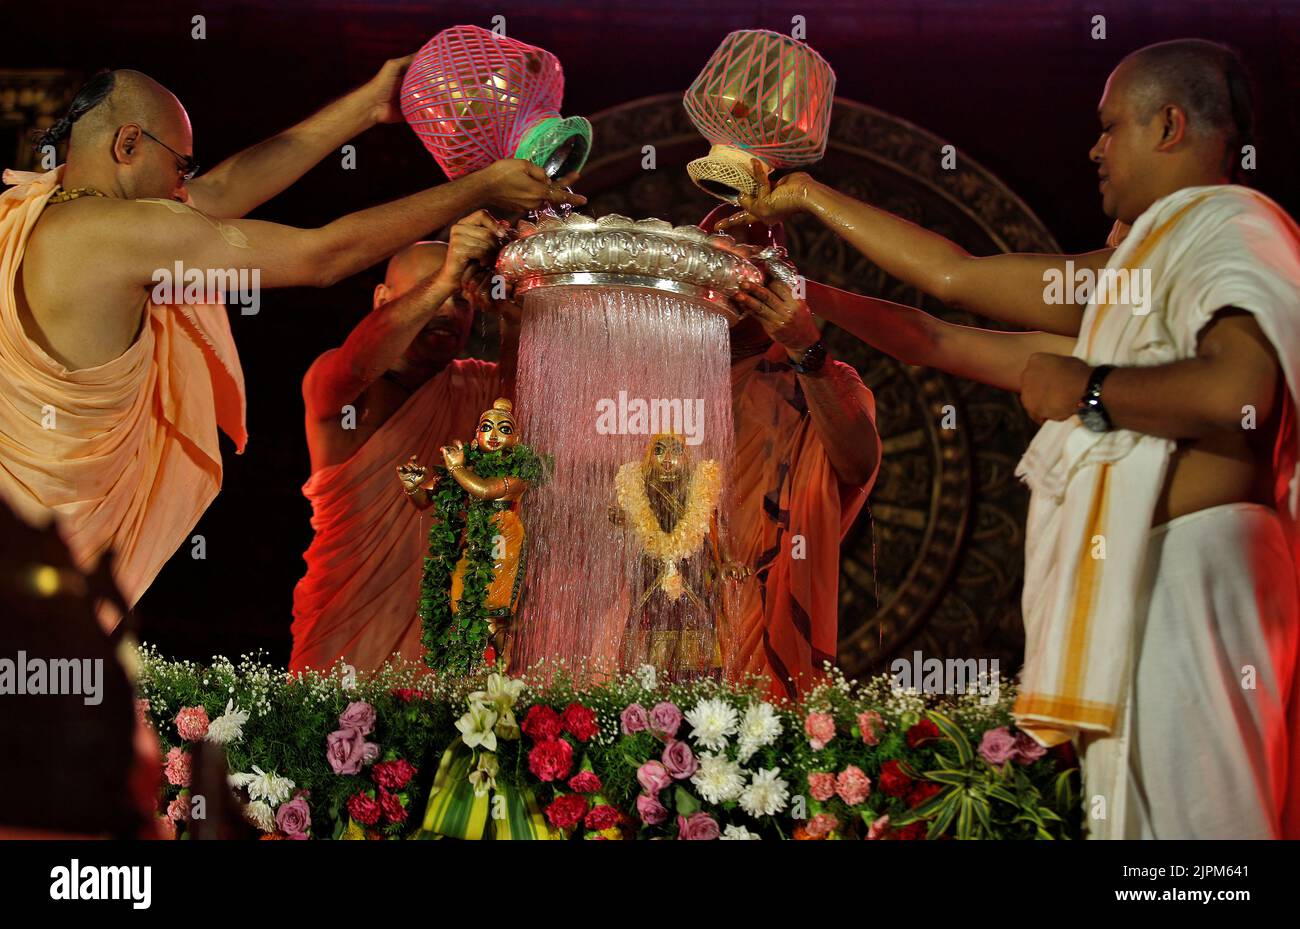 Hindu priests pour holy water over the idols of Hindu Lord Krishna and goddess Radha during the festival of Janmashtami, marking the birth anniversary of Lord Krishna, at a temple in Ahmedabad, India, August 19, 2022. REUTERS/Amit Dave Stock Photo